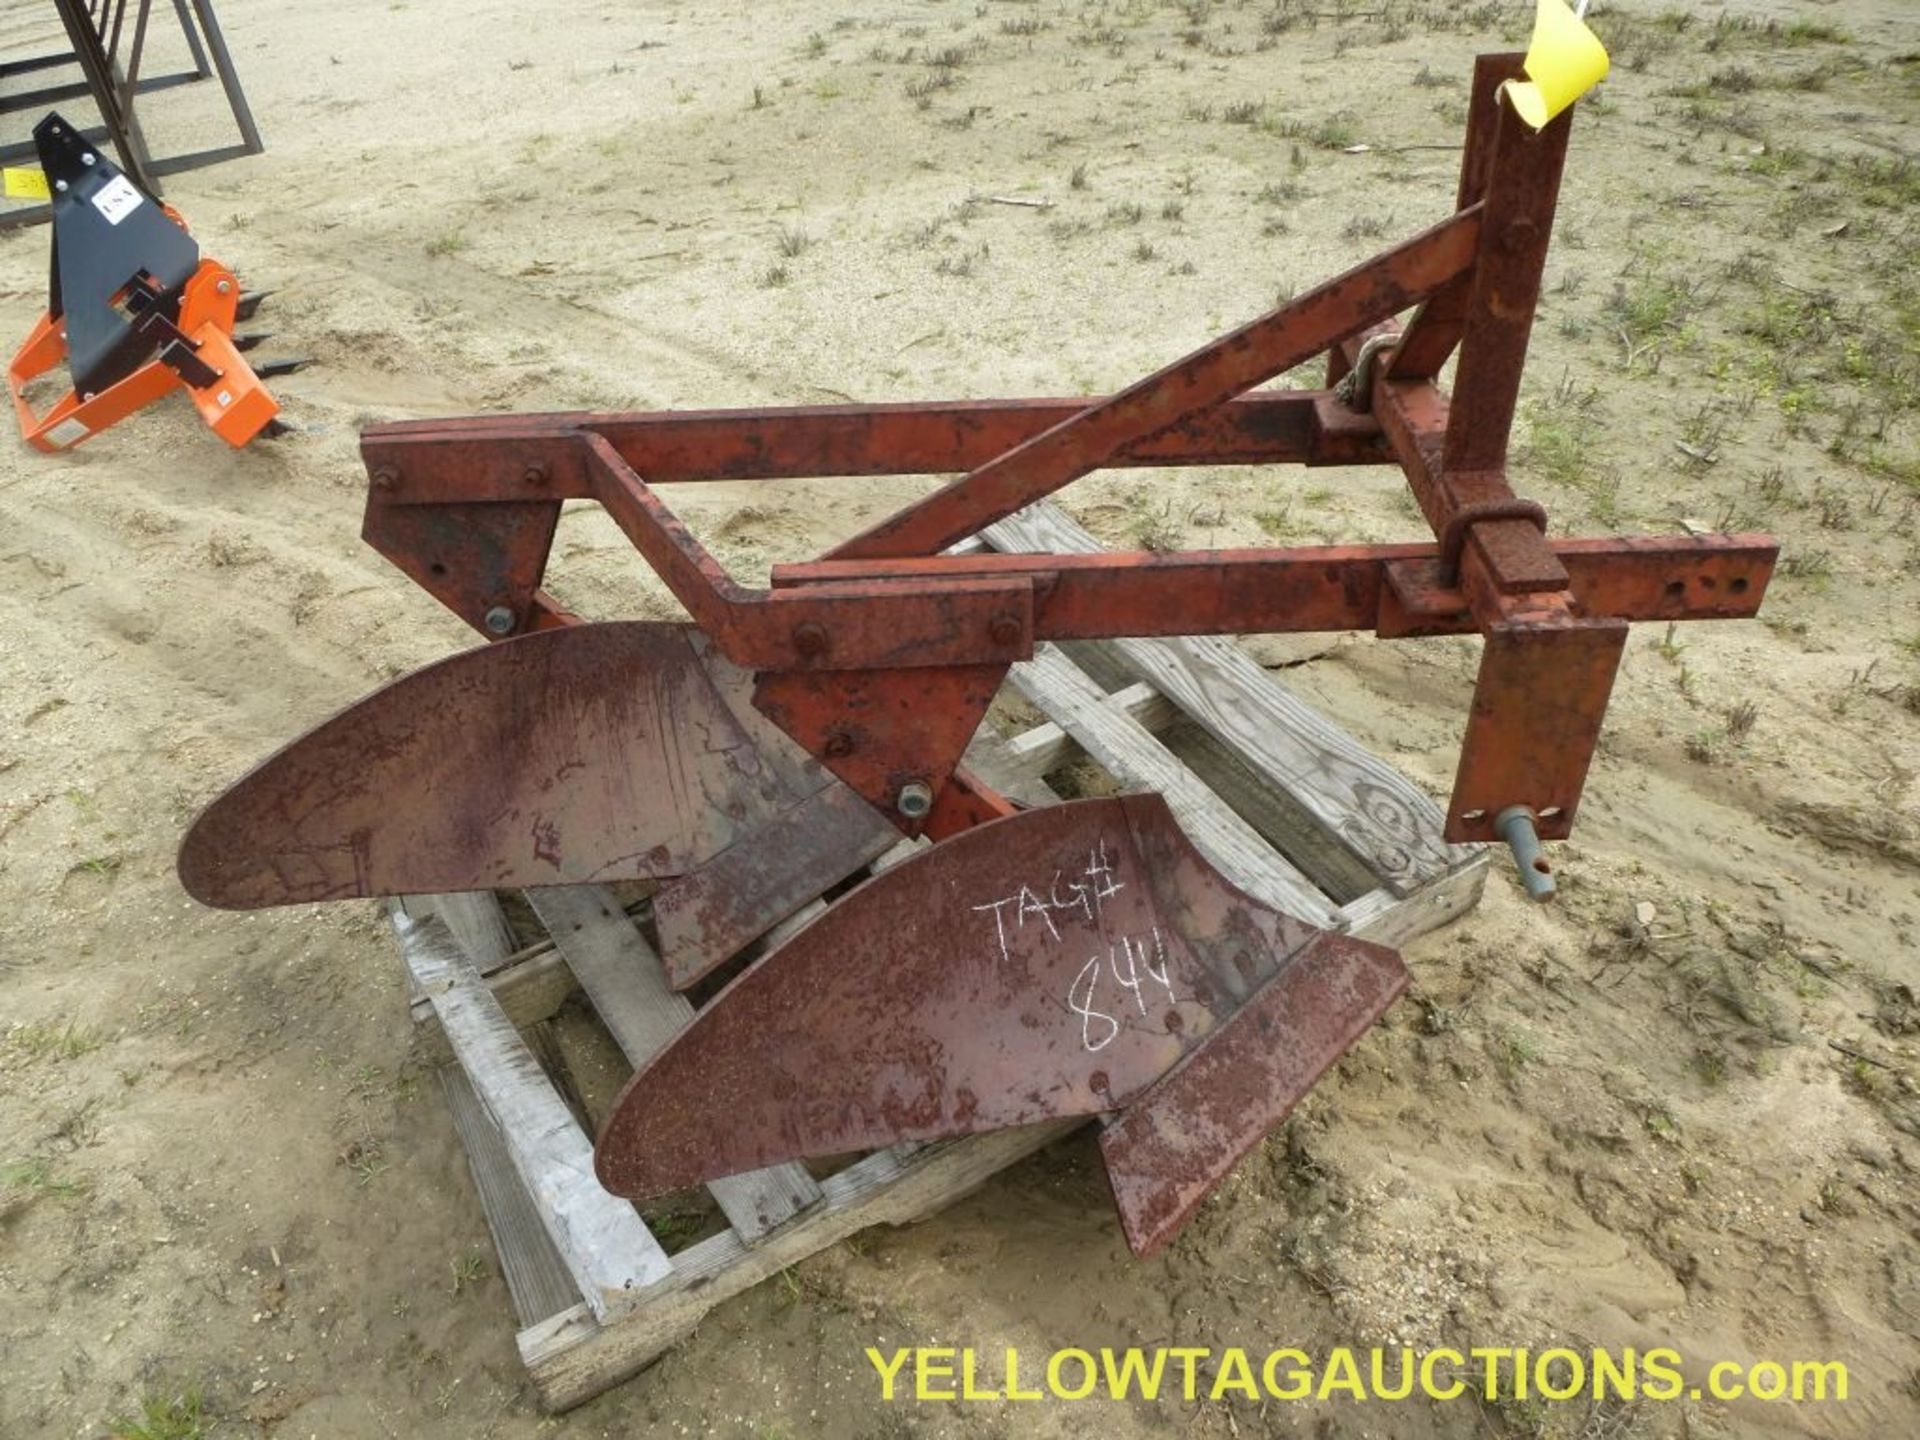 2-Blade Plow with 3-Point Hook Up|Tag: 844